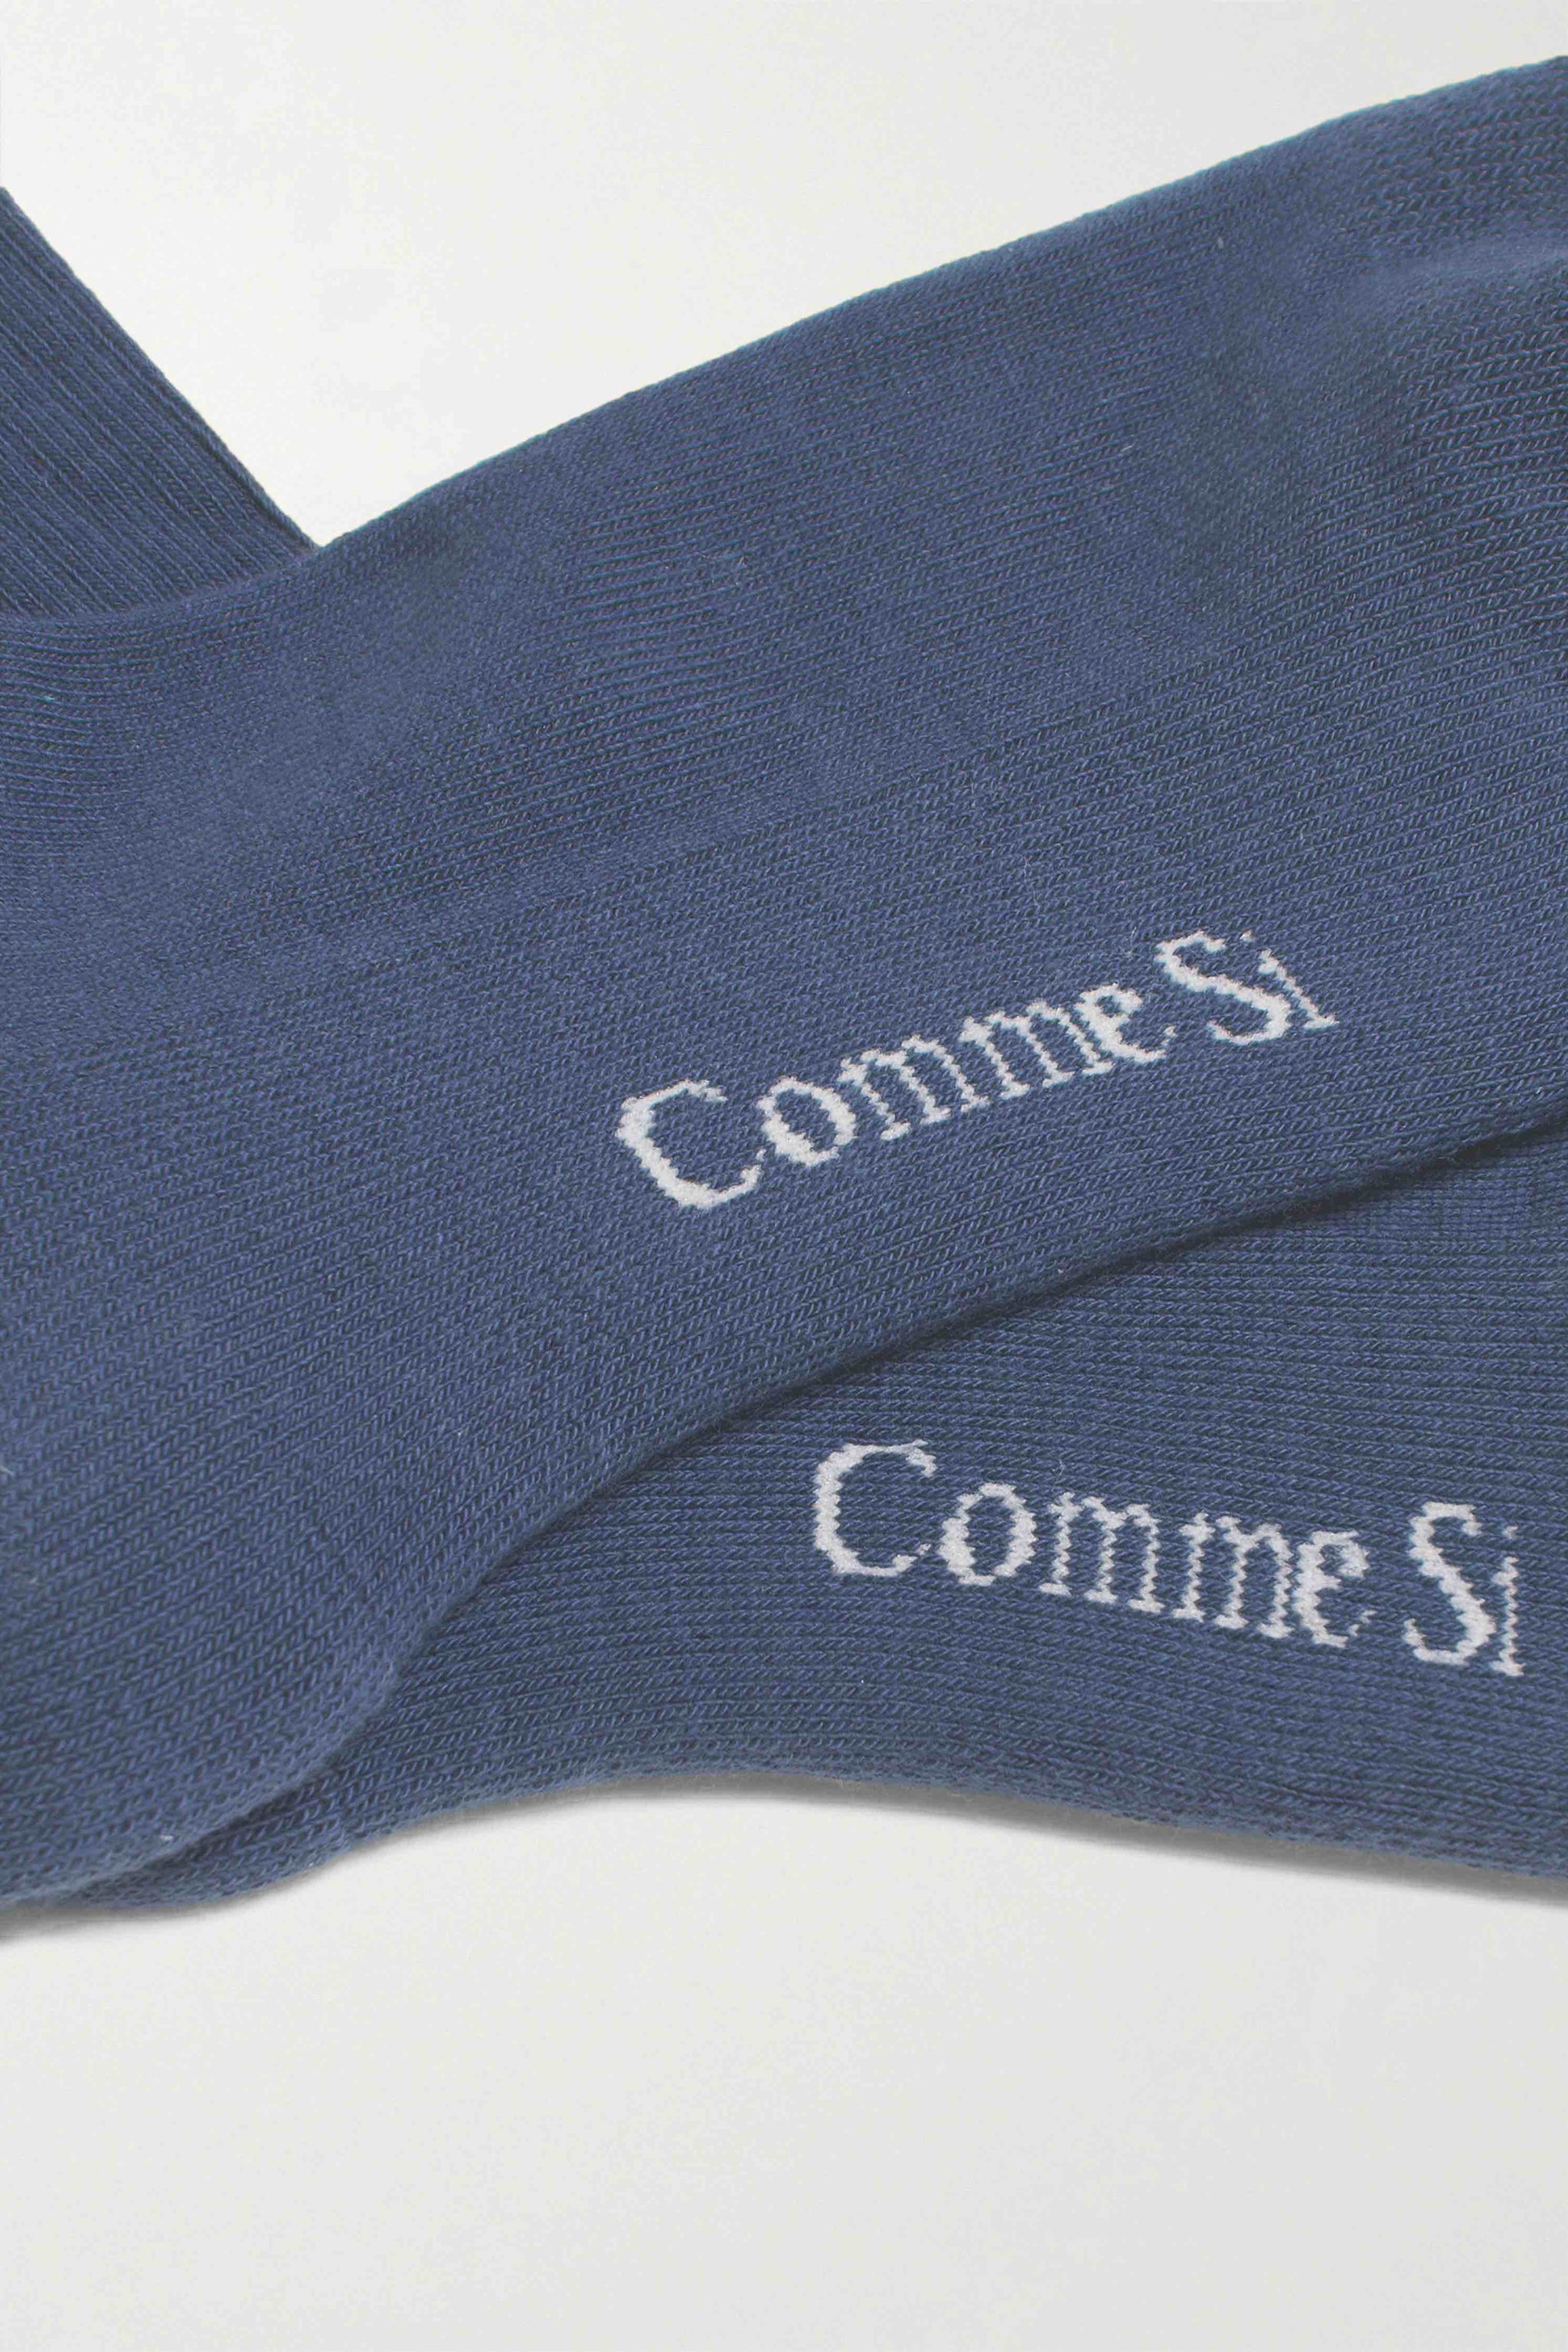 Footbed detail, The Everyday Sock in Neptune, made with Organic Egyptian Cotton, by Comme Si